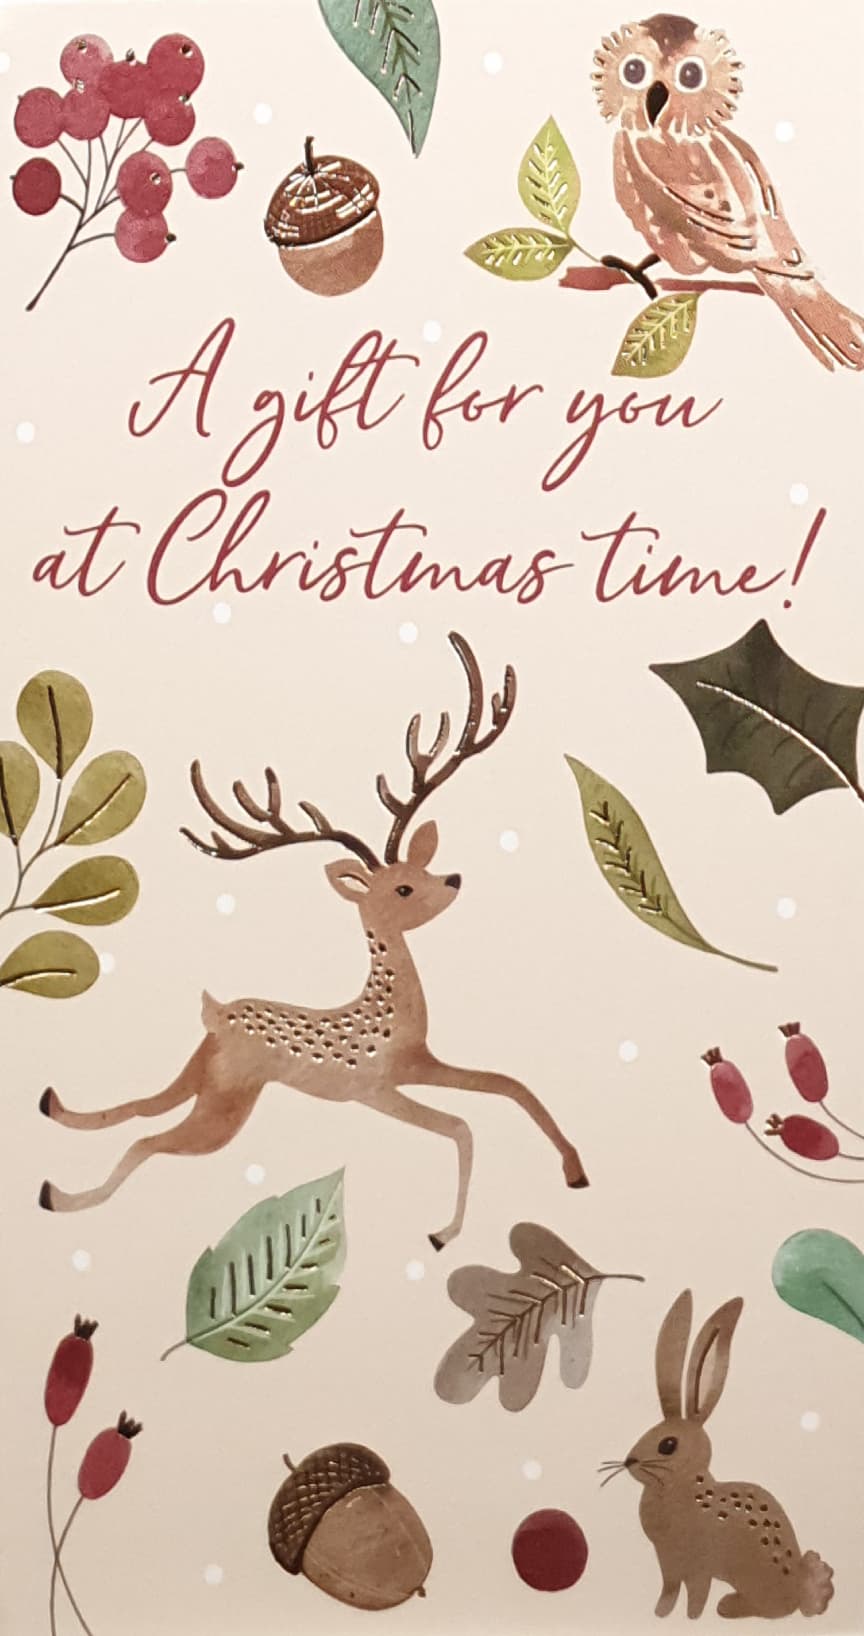 Money Wallet Christmas Card - A Gift For You / Deer, Owl & Rabbit with Chestnuts